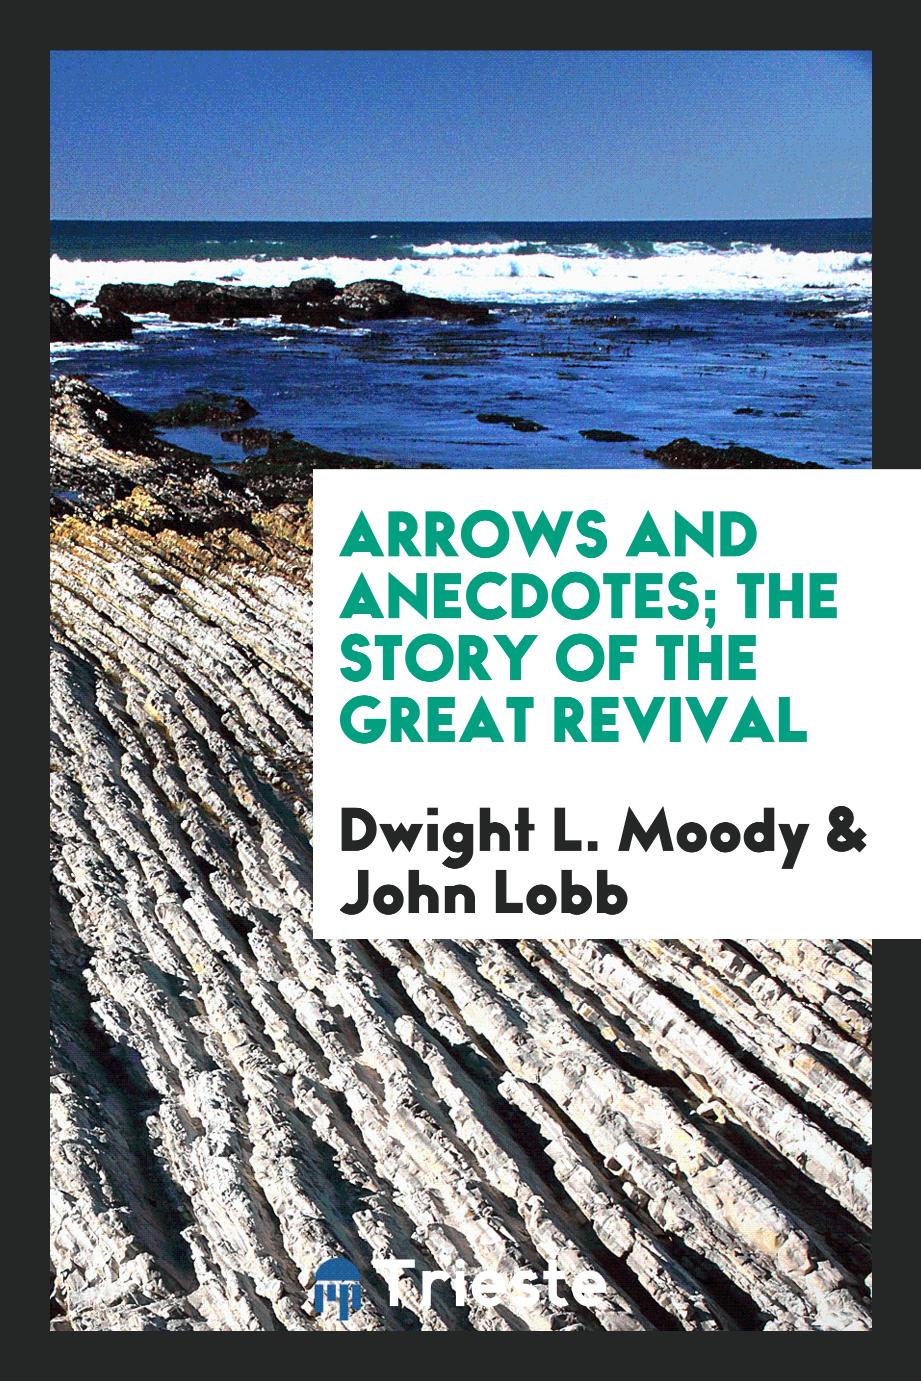 Dwight L. Moody, John Lobb - Arrows and anecdotes; The story of the great revival